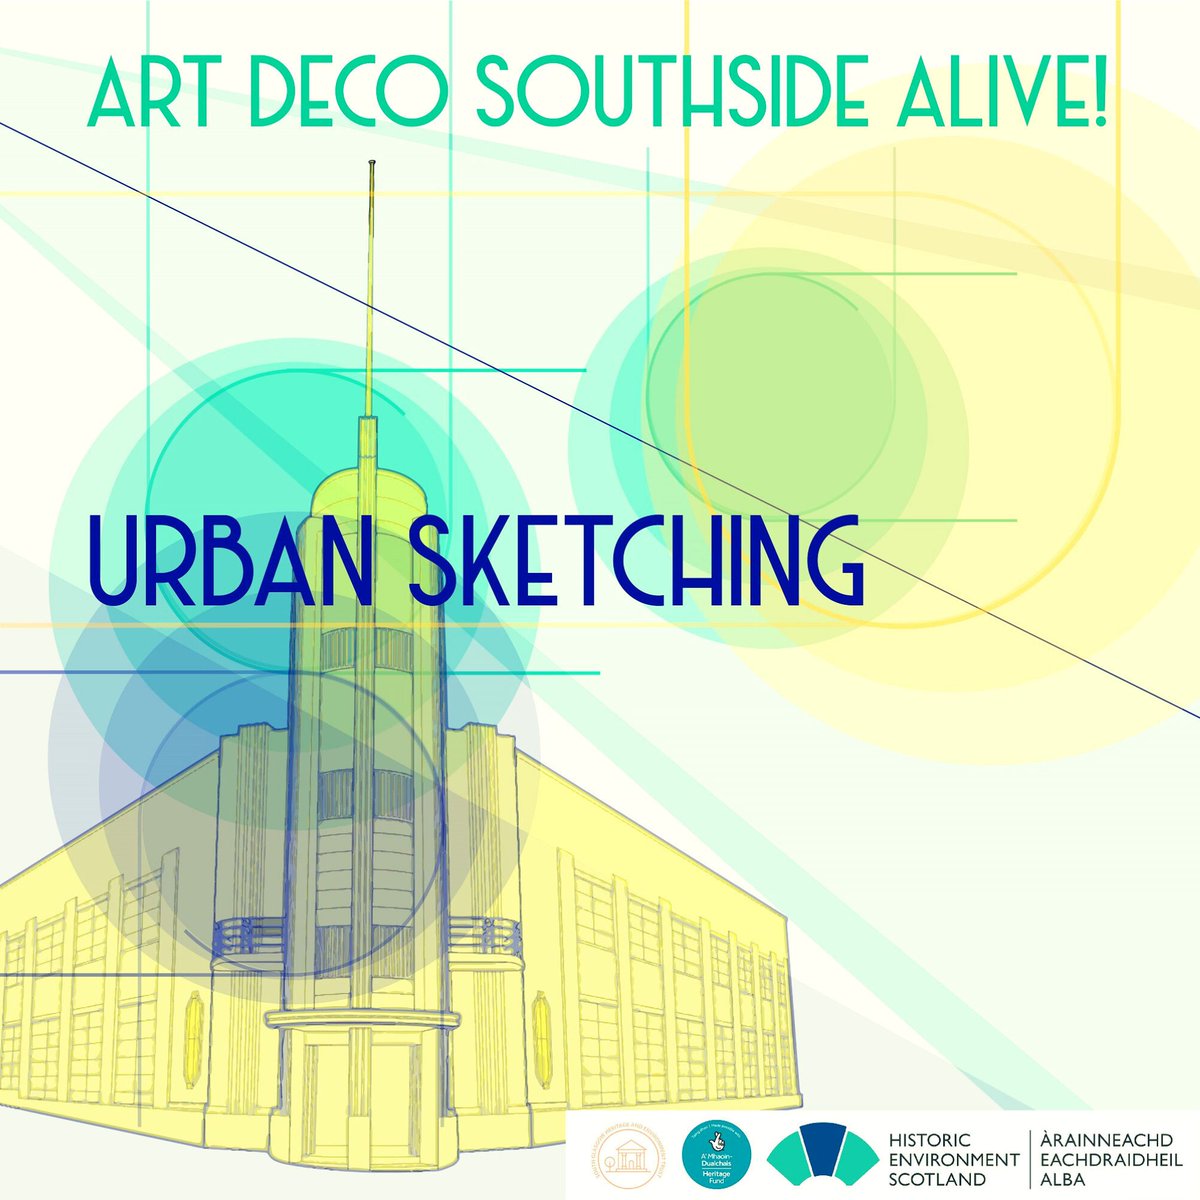 Sketch our Southside #ArtDeco buildings, before they're either saved or lost! Beginners to intermediate sessions for Gorbals, Tradeston, Pollokshields East & Govanhill residents #ArtDecoSouthsideAlive
💚 Sat 15 Jun
💚 Sat 22 Jun
💚  Sun 30 Jun
Bookings 👉 eventbrite.co.uk/e/urban-sketch…